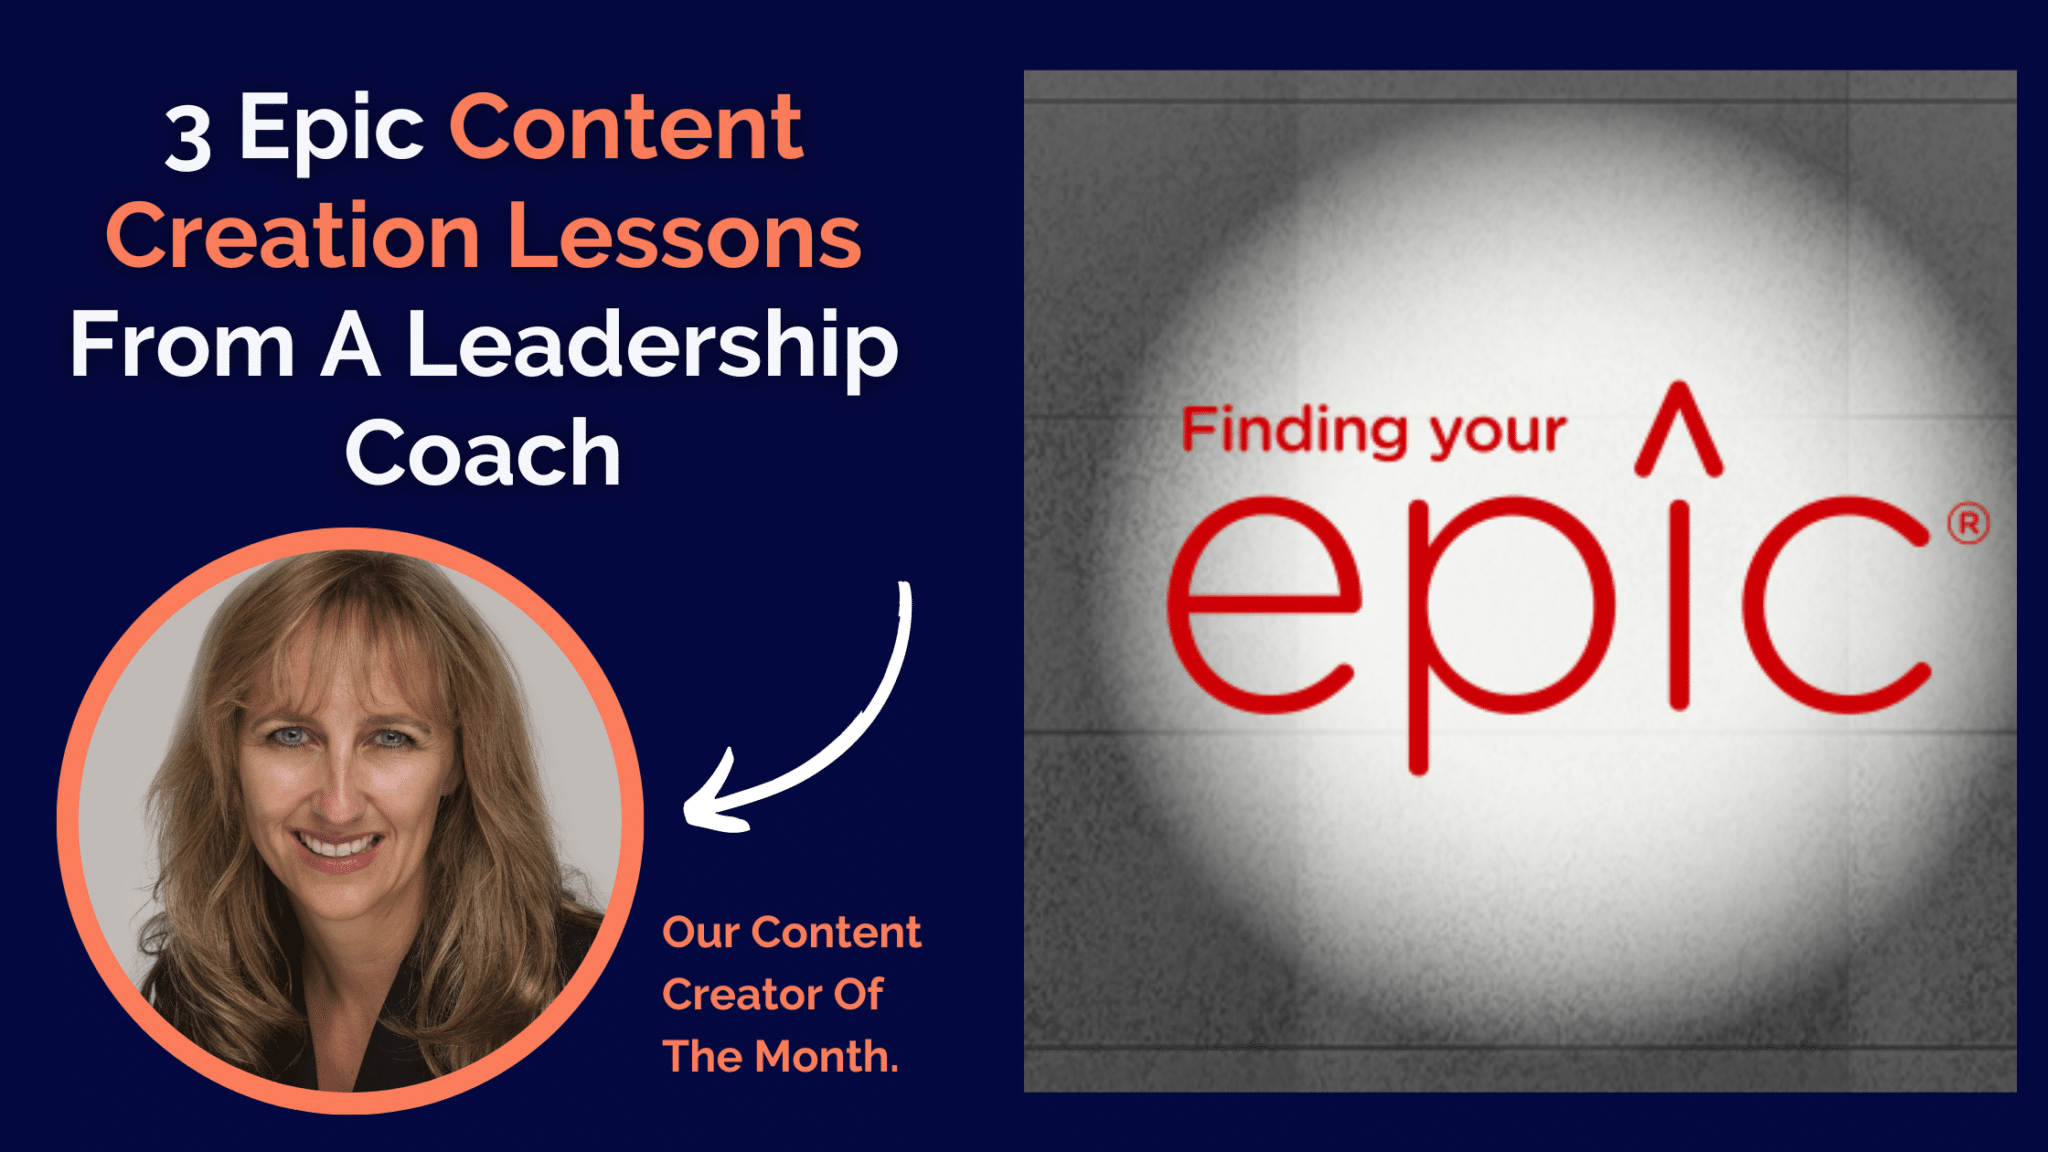 3 Epic Content Creation Lessons From A Leadership Coach